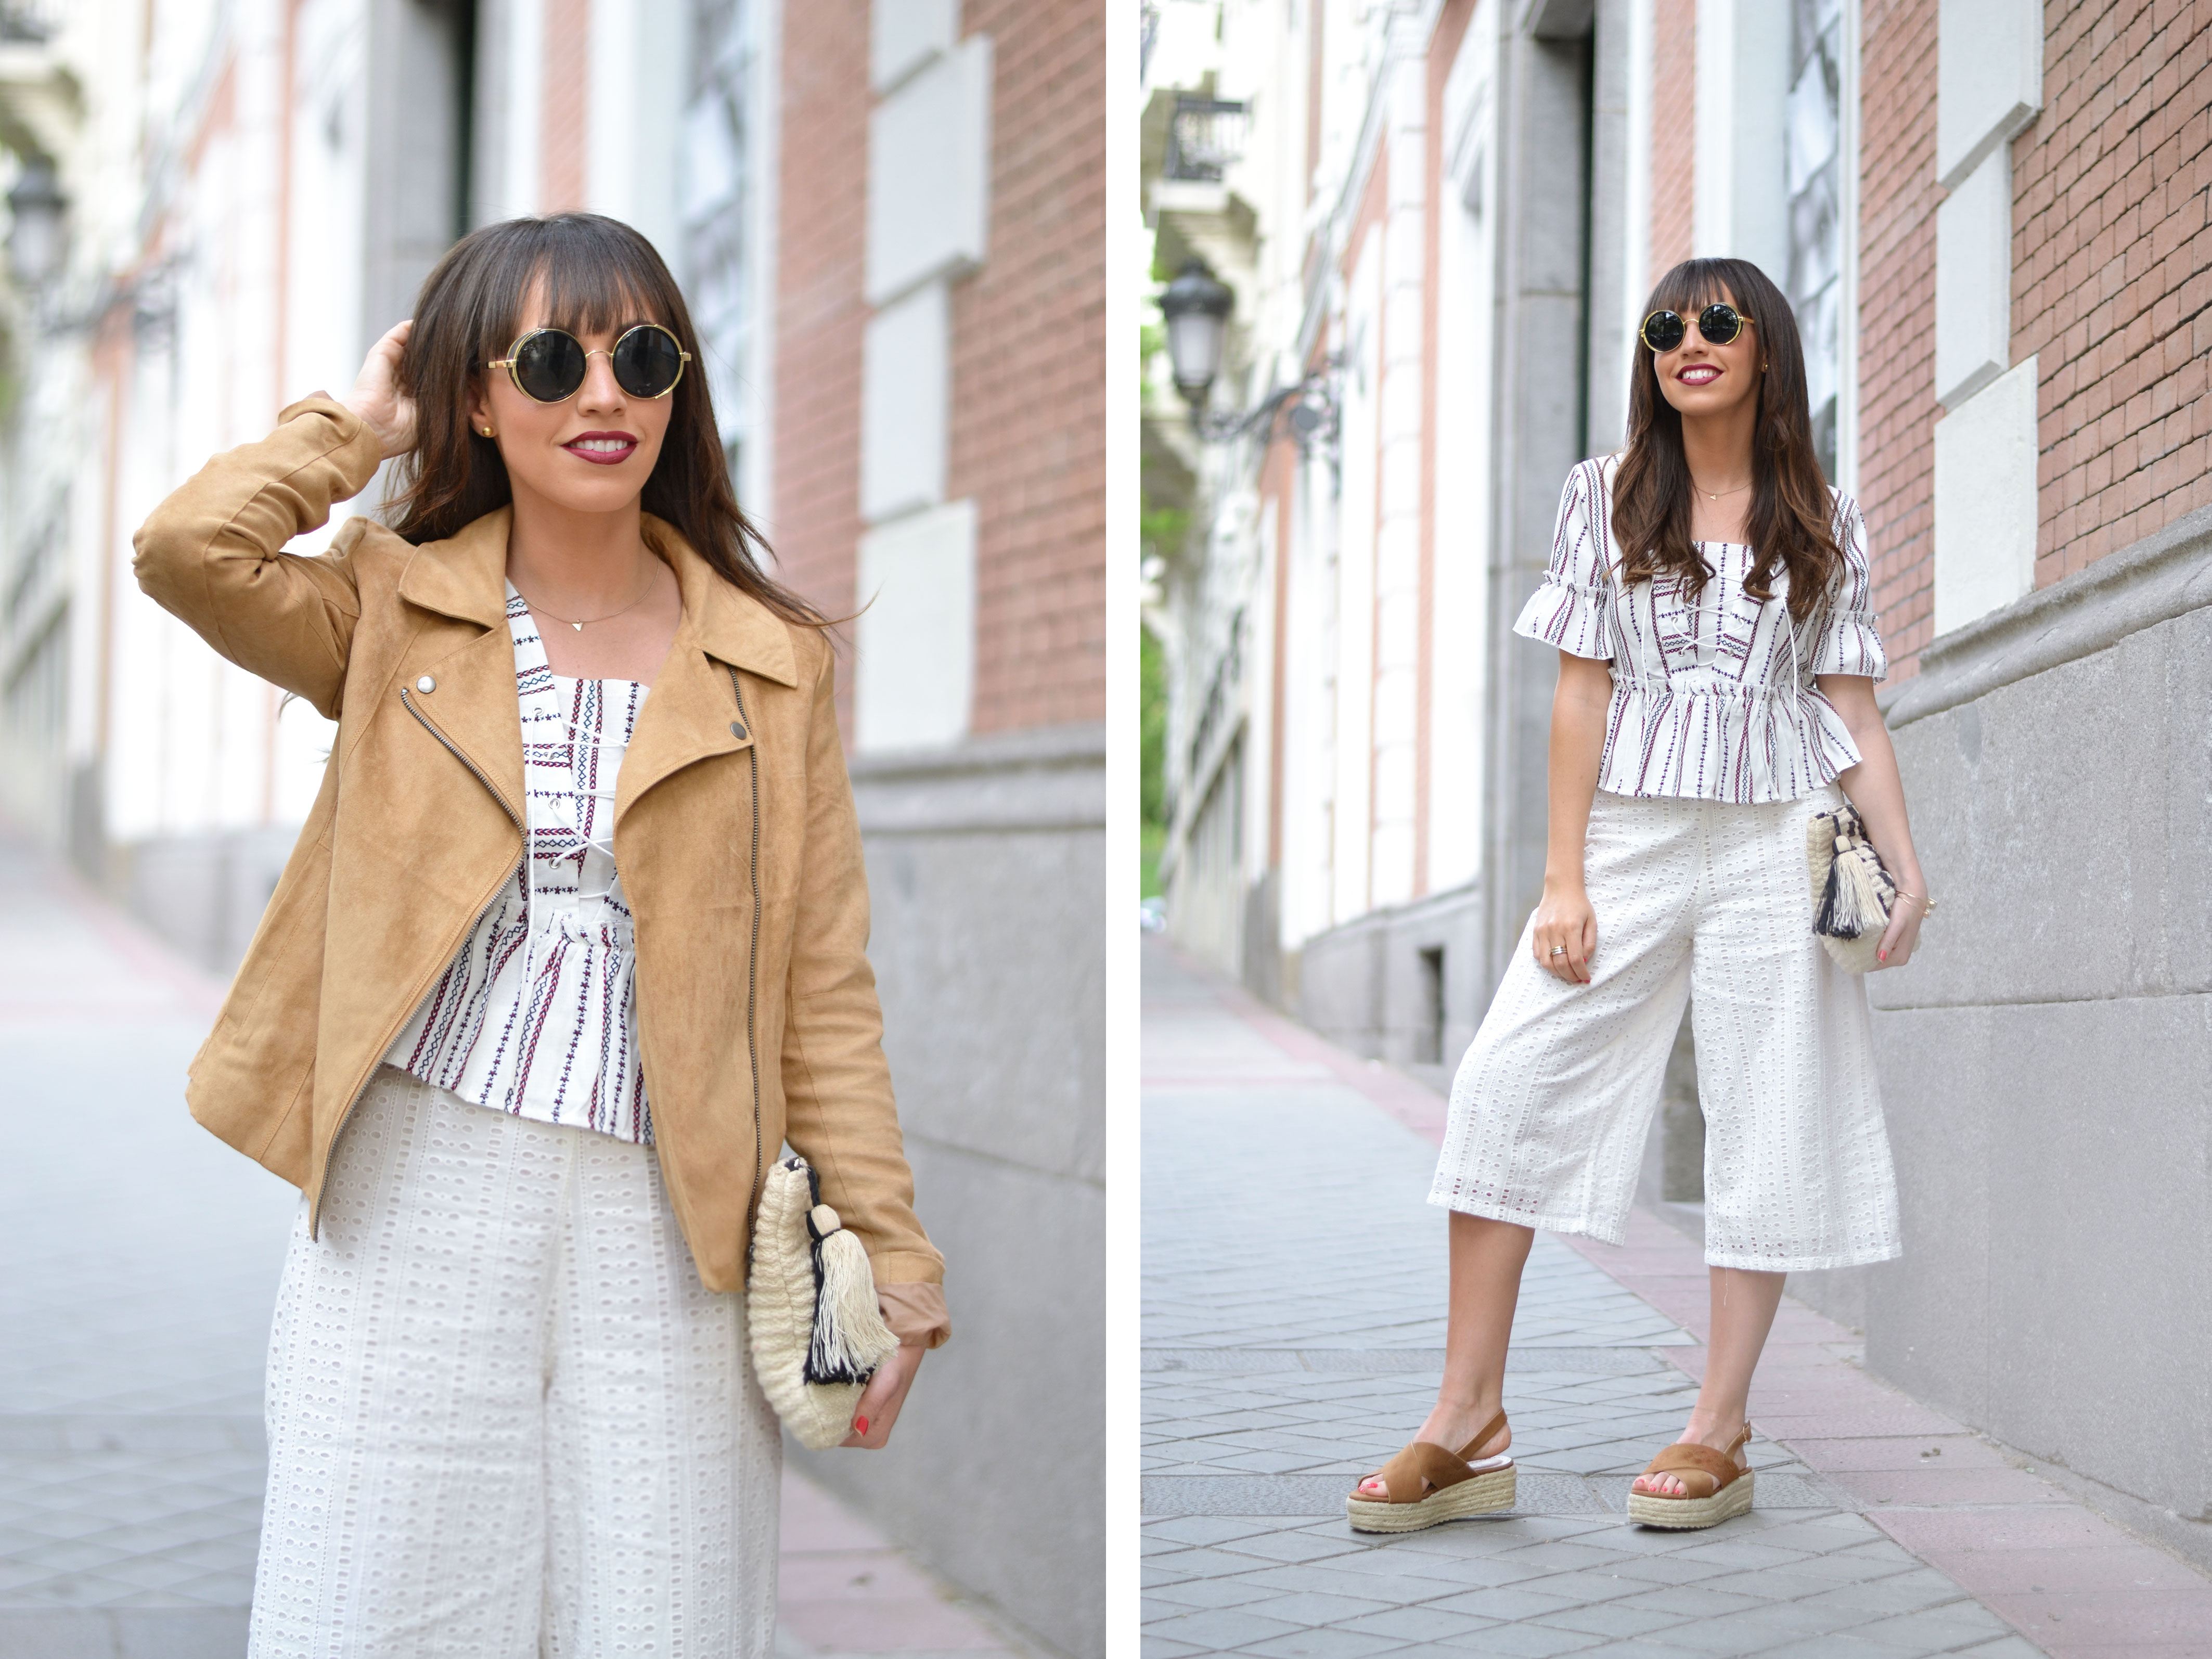 culotte pants, beige jacket, lace up blouse, spring outfit, street style